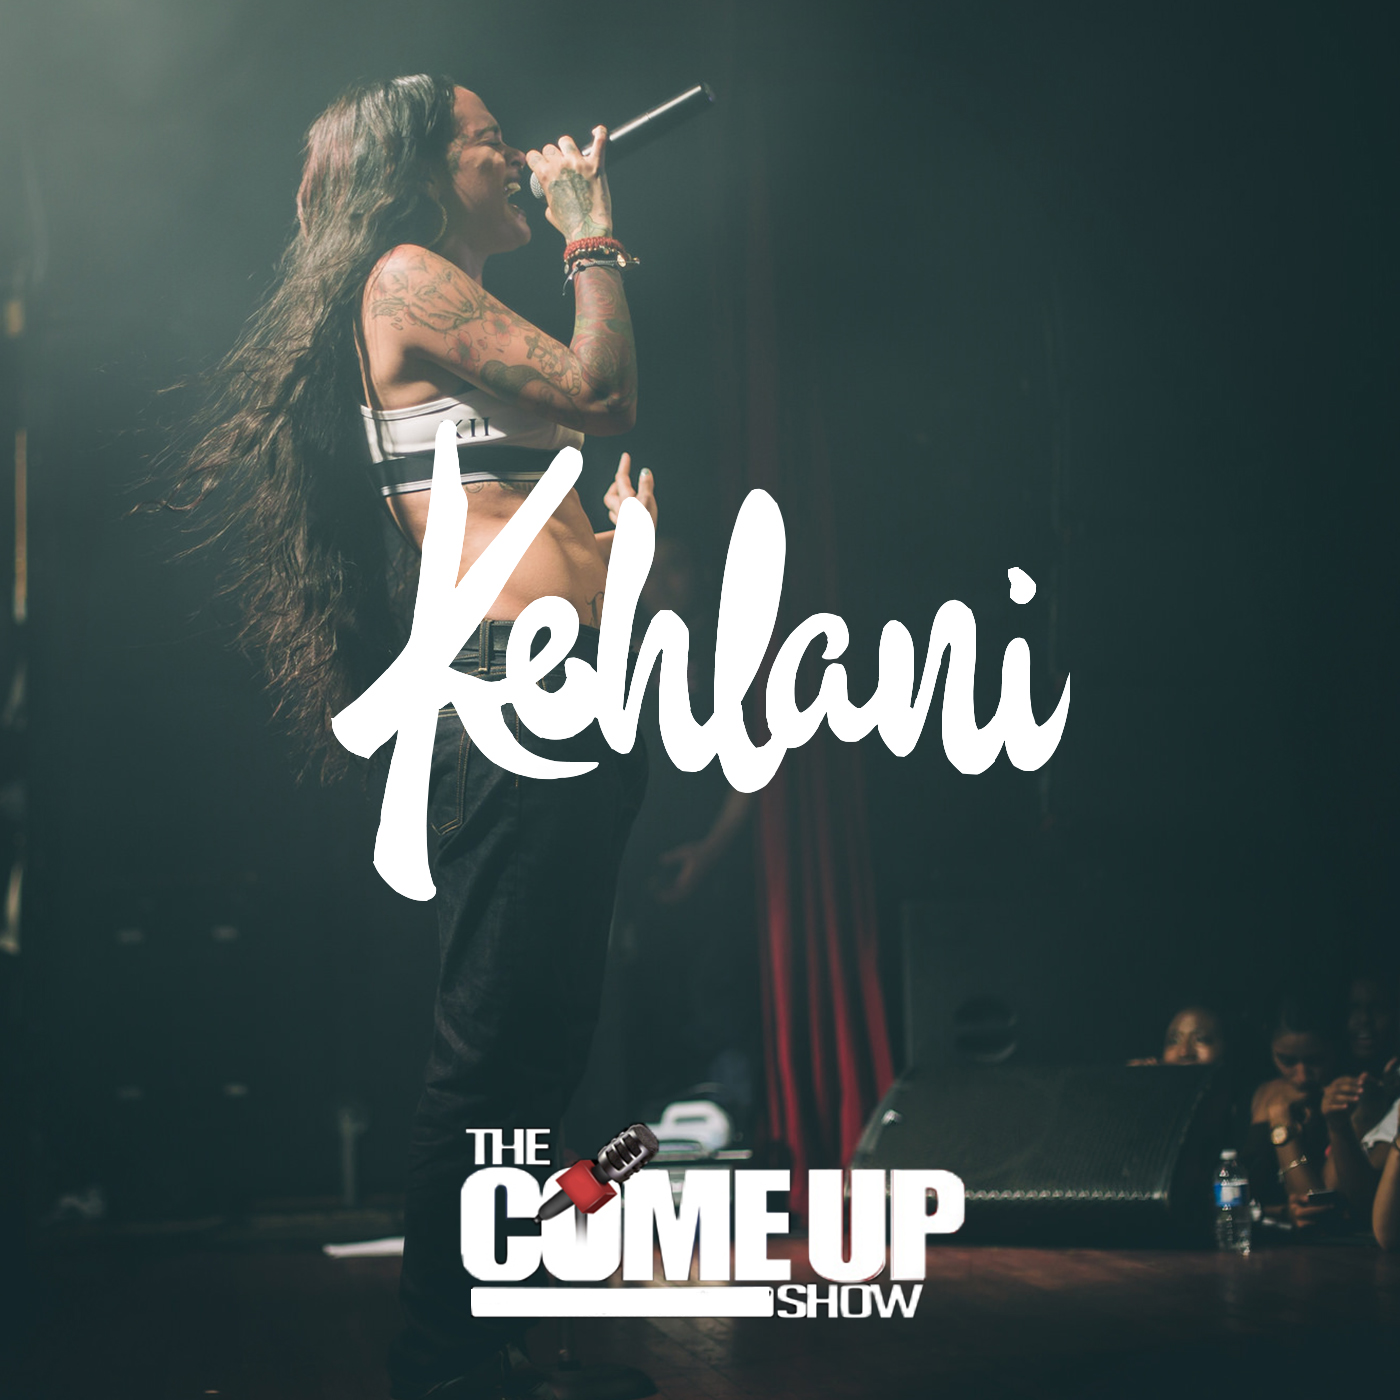 Thumbnail for "Kehlani explains why she deleted her twitter and how yes men can be your downfall".